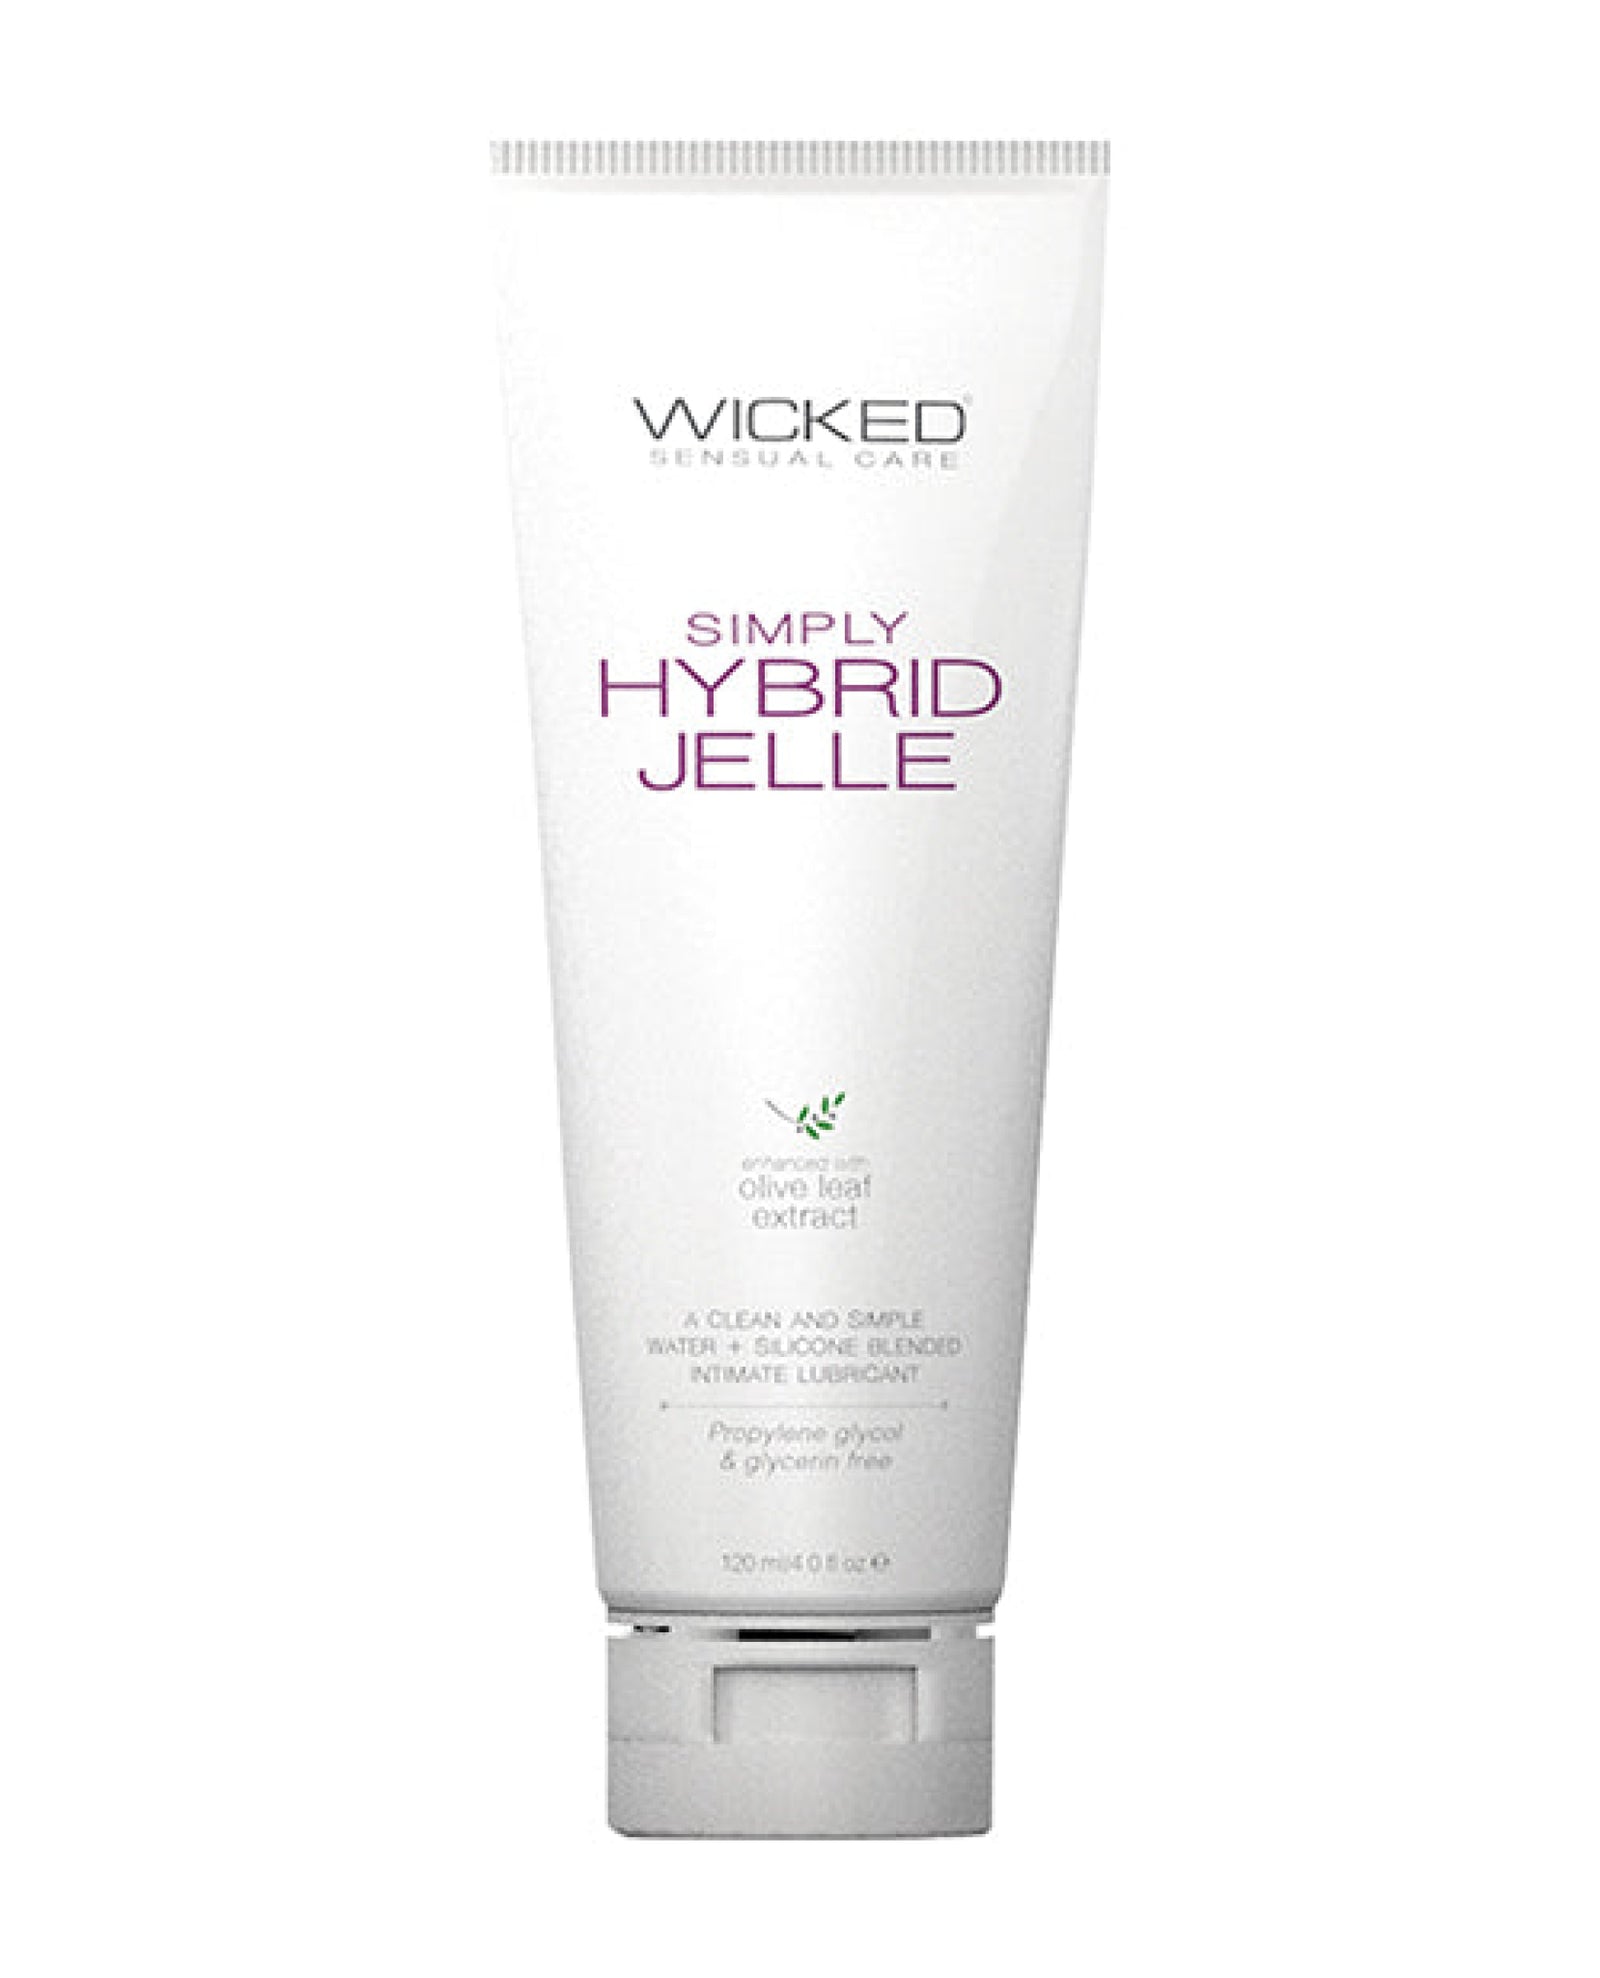 Wicked Sensual Care Simply Hybrid Jelle Lubricant Wicked Sensual Care